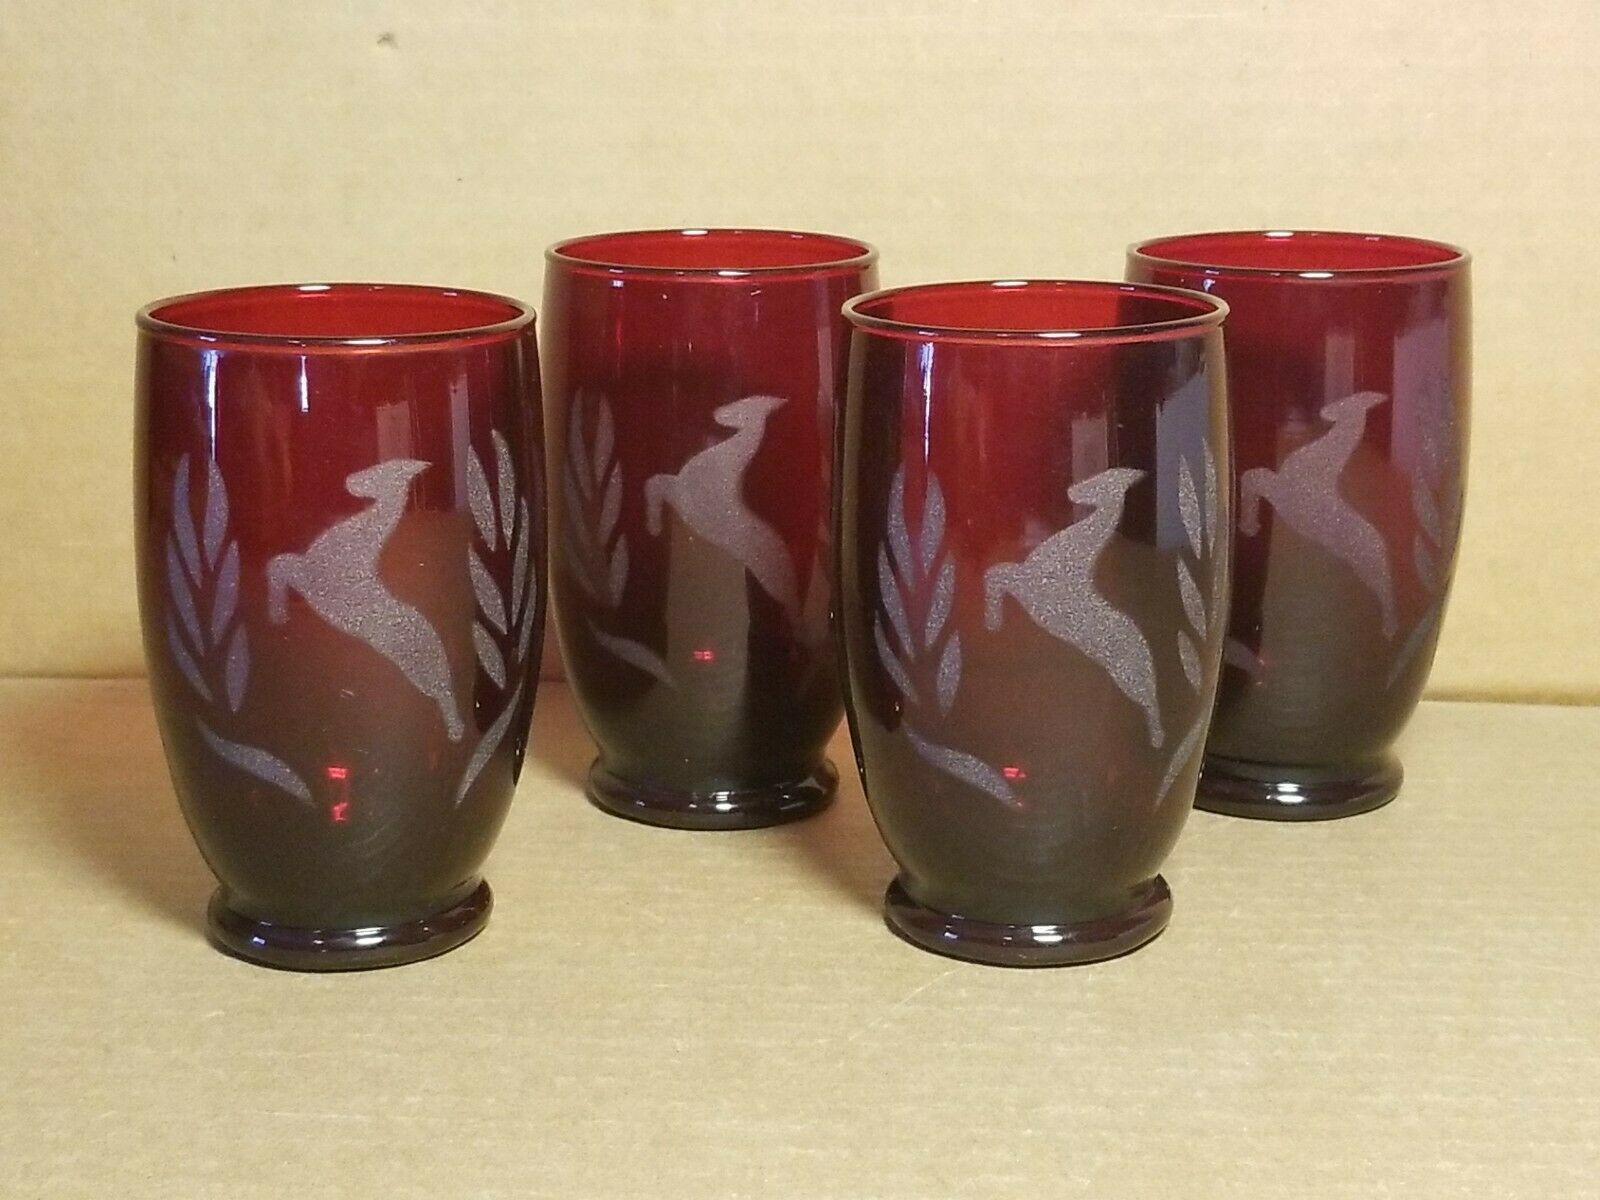 4 - Fire King Anchorglass Ruby Deer Etching Drinking Glasses Tumblers Roly Poly